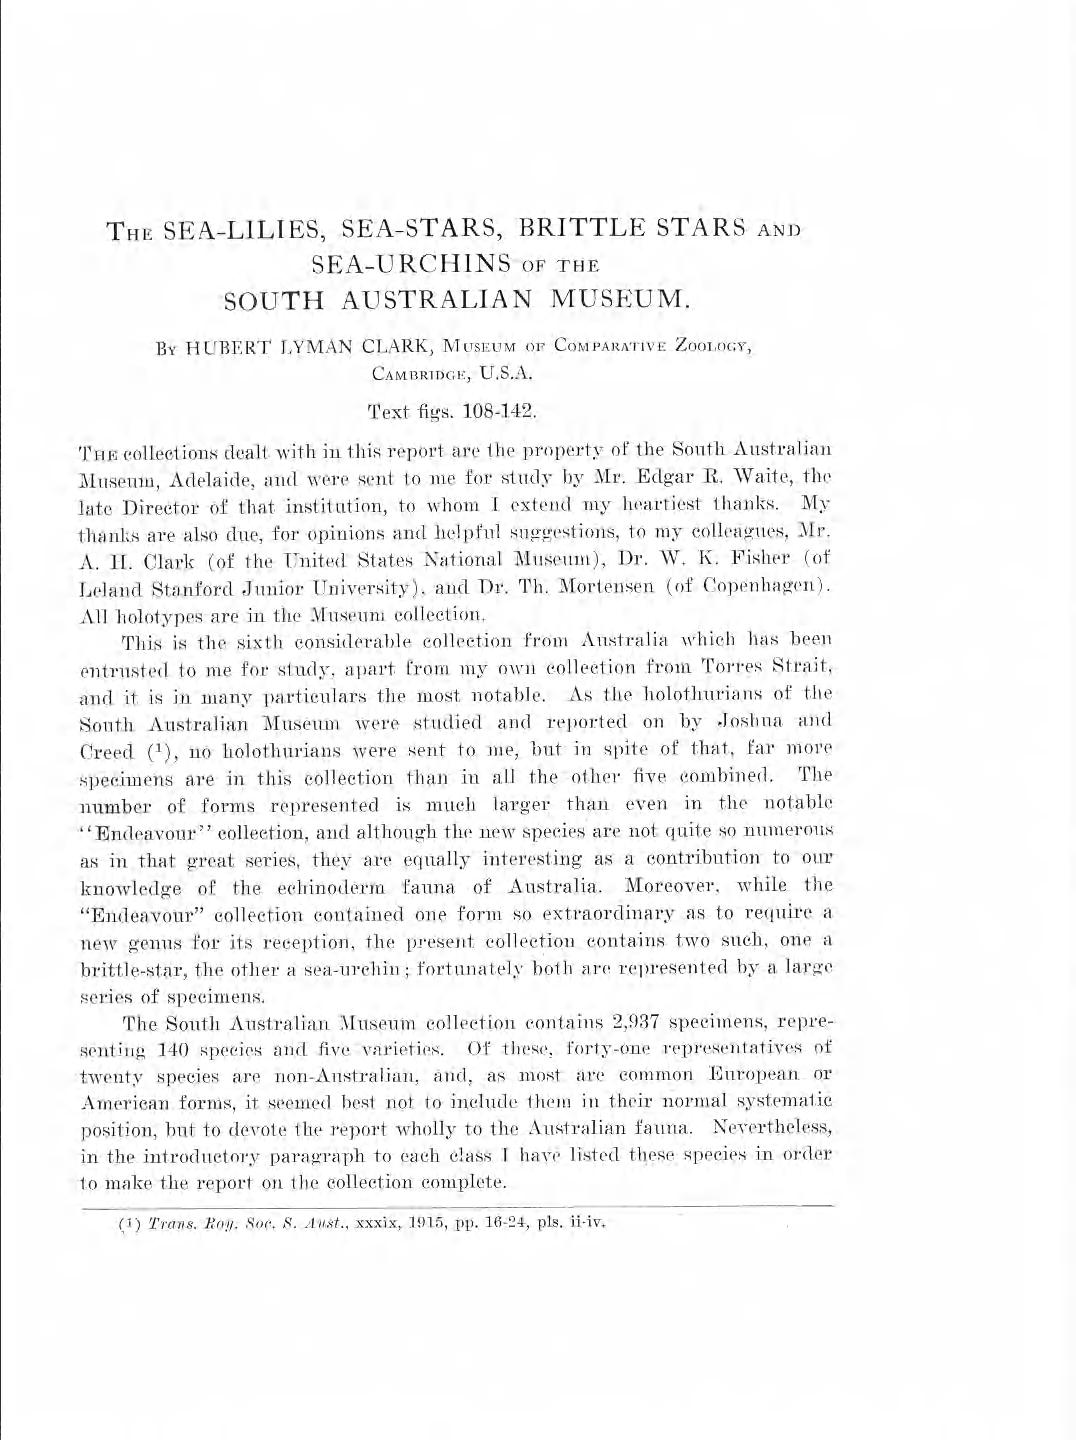 Media of type text, Clark 1928. Description:The Sea-Lilies, Sea-Stars, Brittle Stars and Sea-Urchins of the South Australian Museum